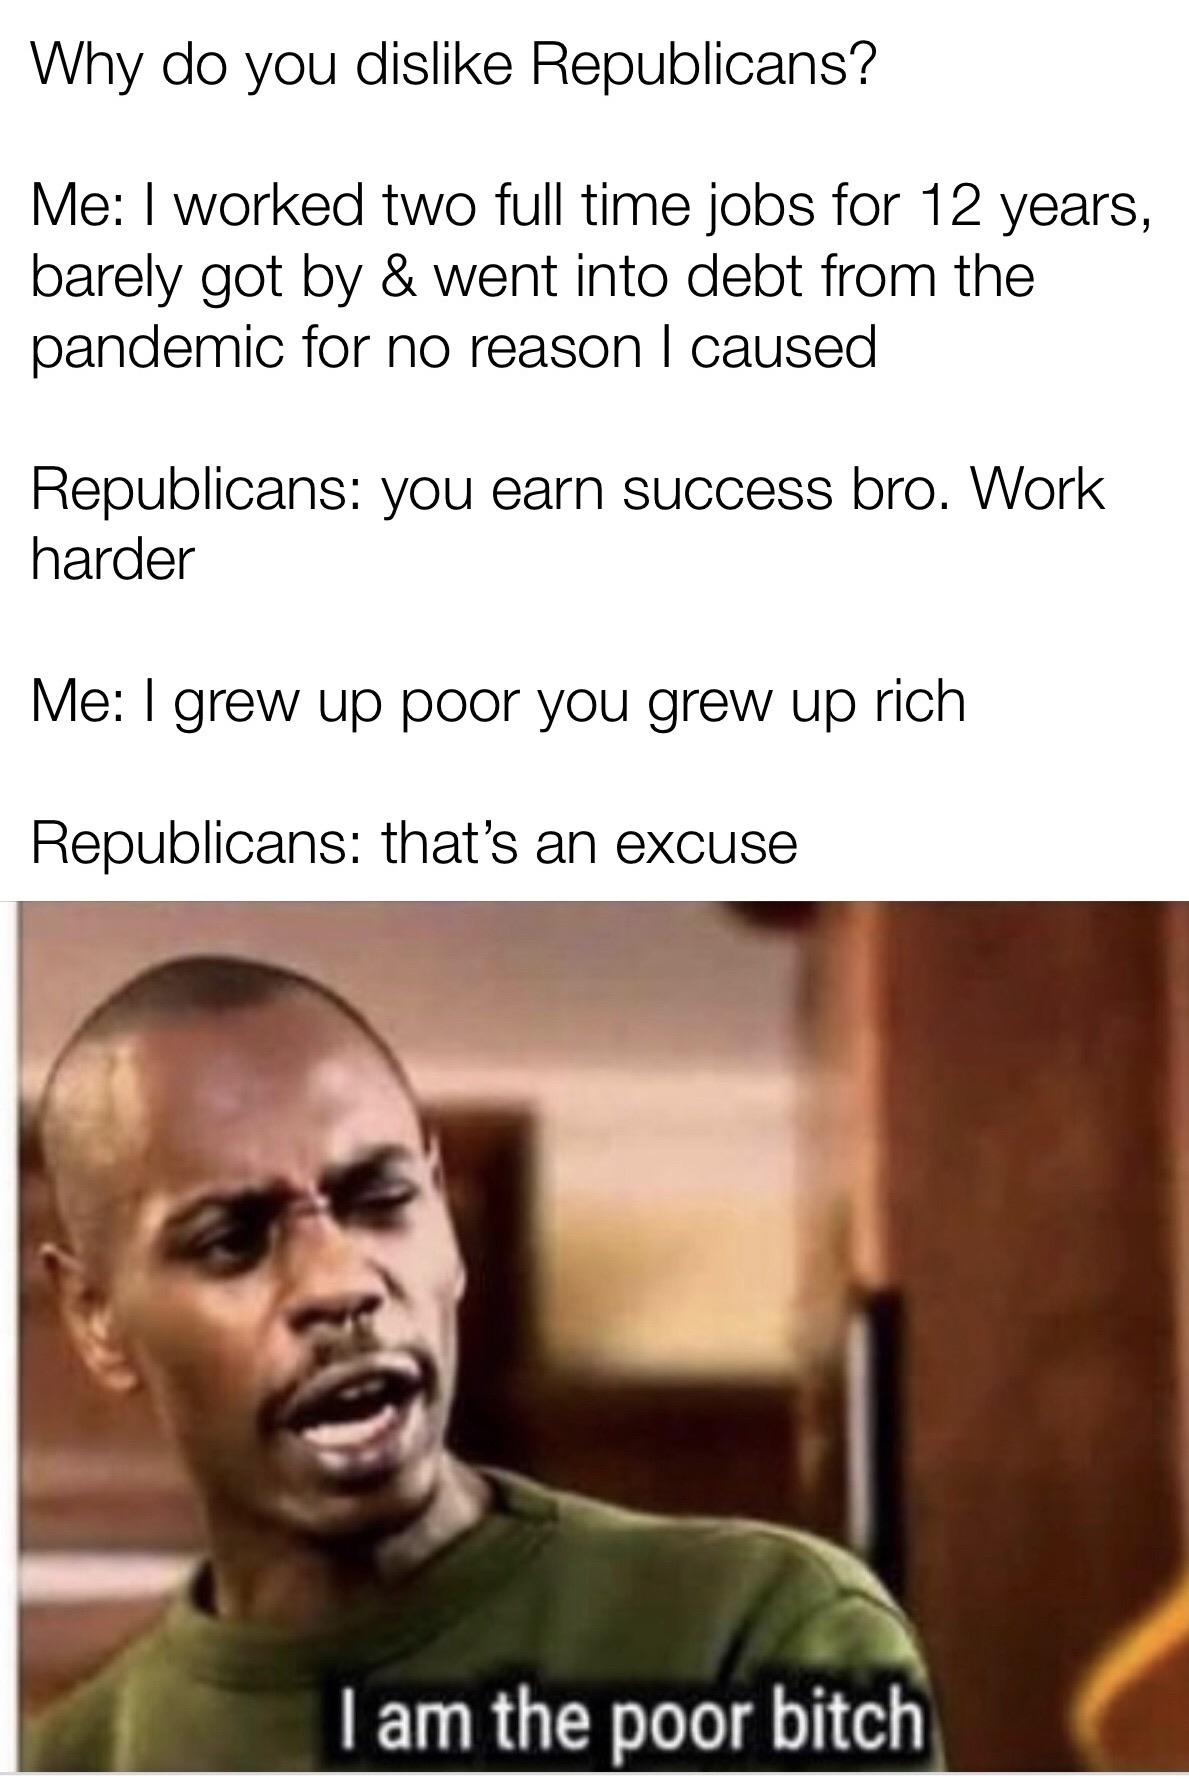 Political, America, Trump, Republicans, Kanye Political Memes Political, America, Trump, Republicans, Kanye text: Why do you dislike Republicans? Me: I worked two full time jobs for 12 years, barely got by & went into debt from the pandemic for no reason I caused Republicans: you earn success bro. Work harder Me: I grew up poor you grew up rich Republicans: that's an excuse I am the poor bitch 